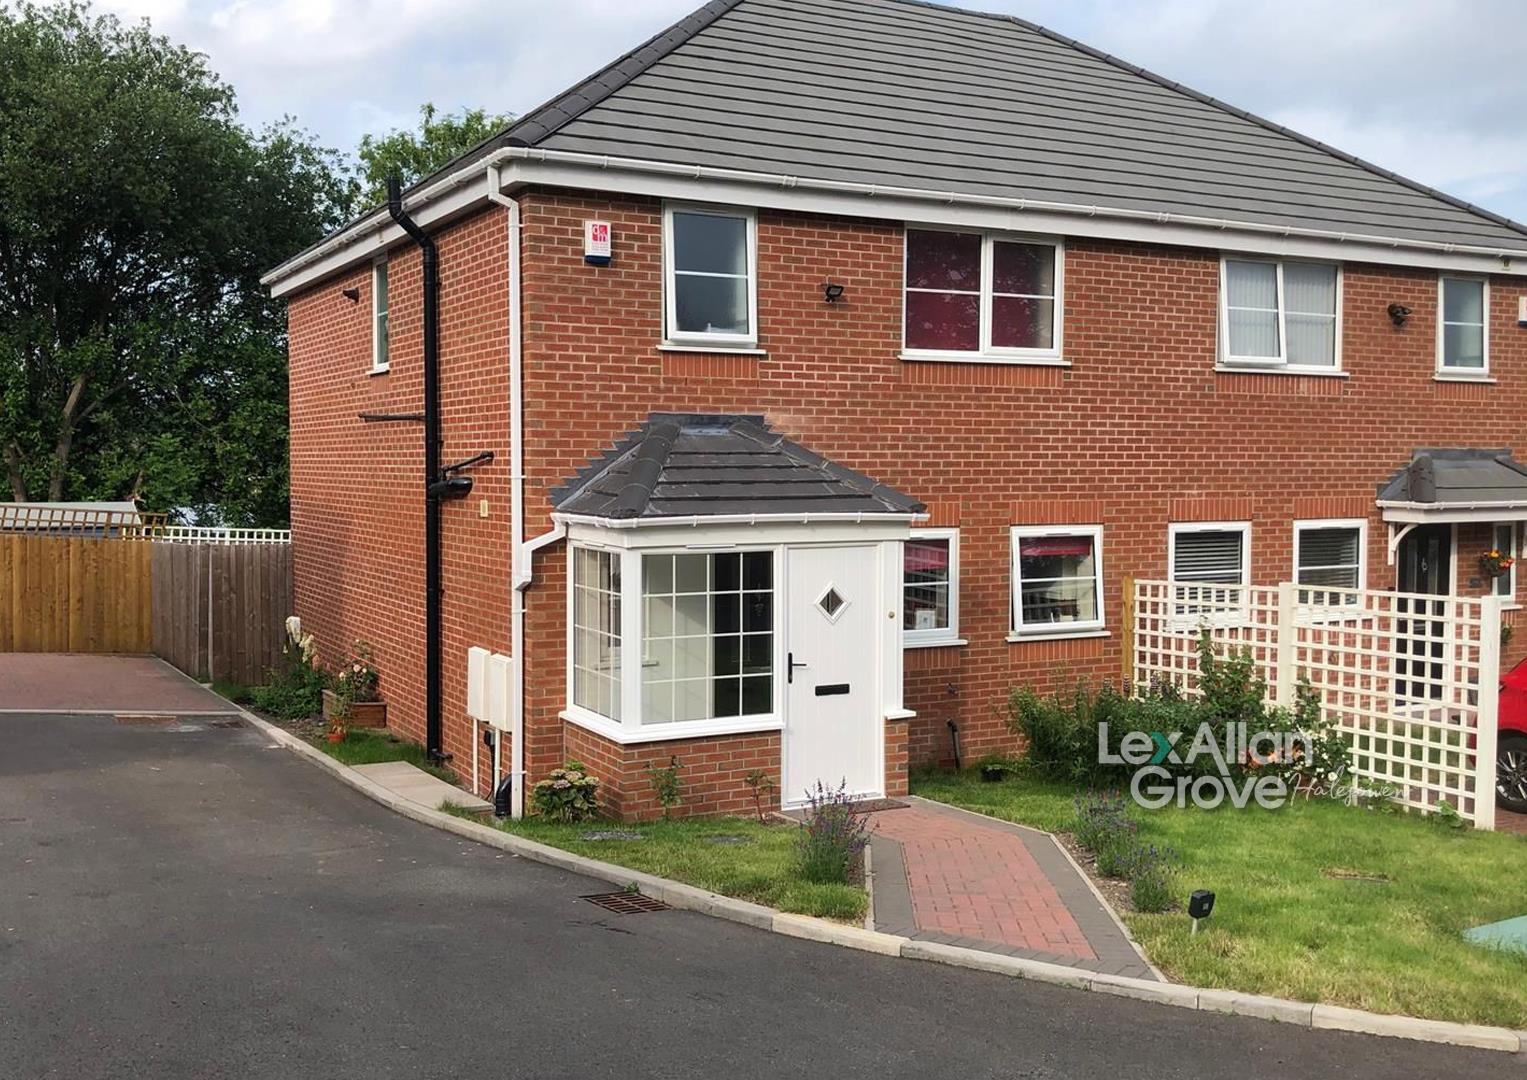 3 bed  for sale in Stourbridge Road, Dudley, DY1 